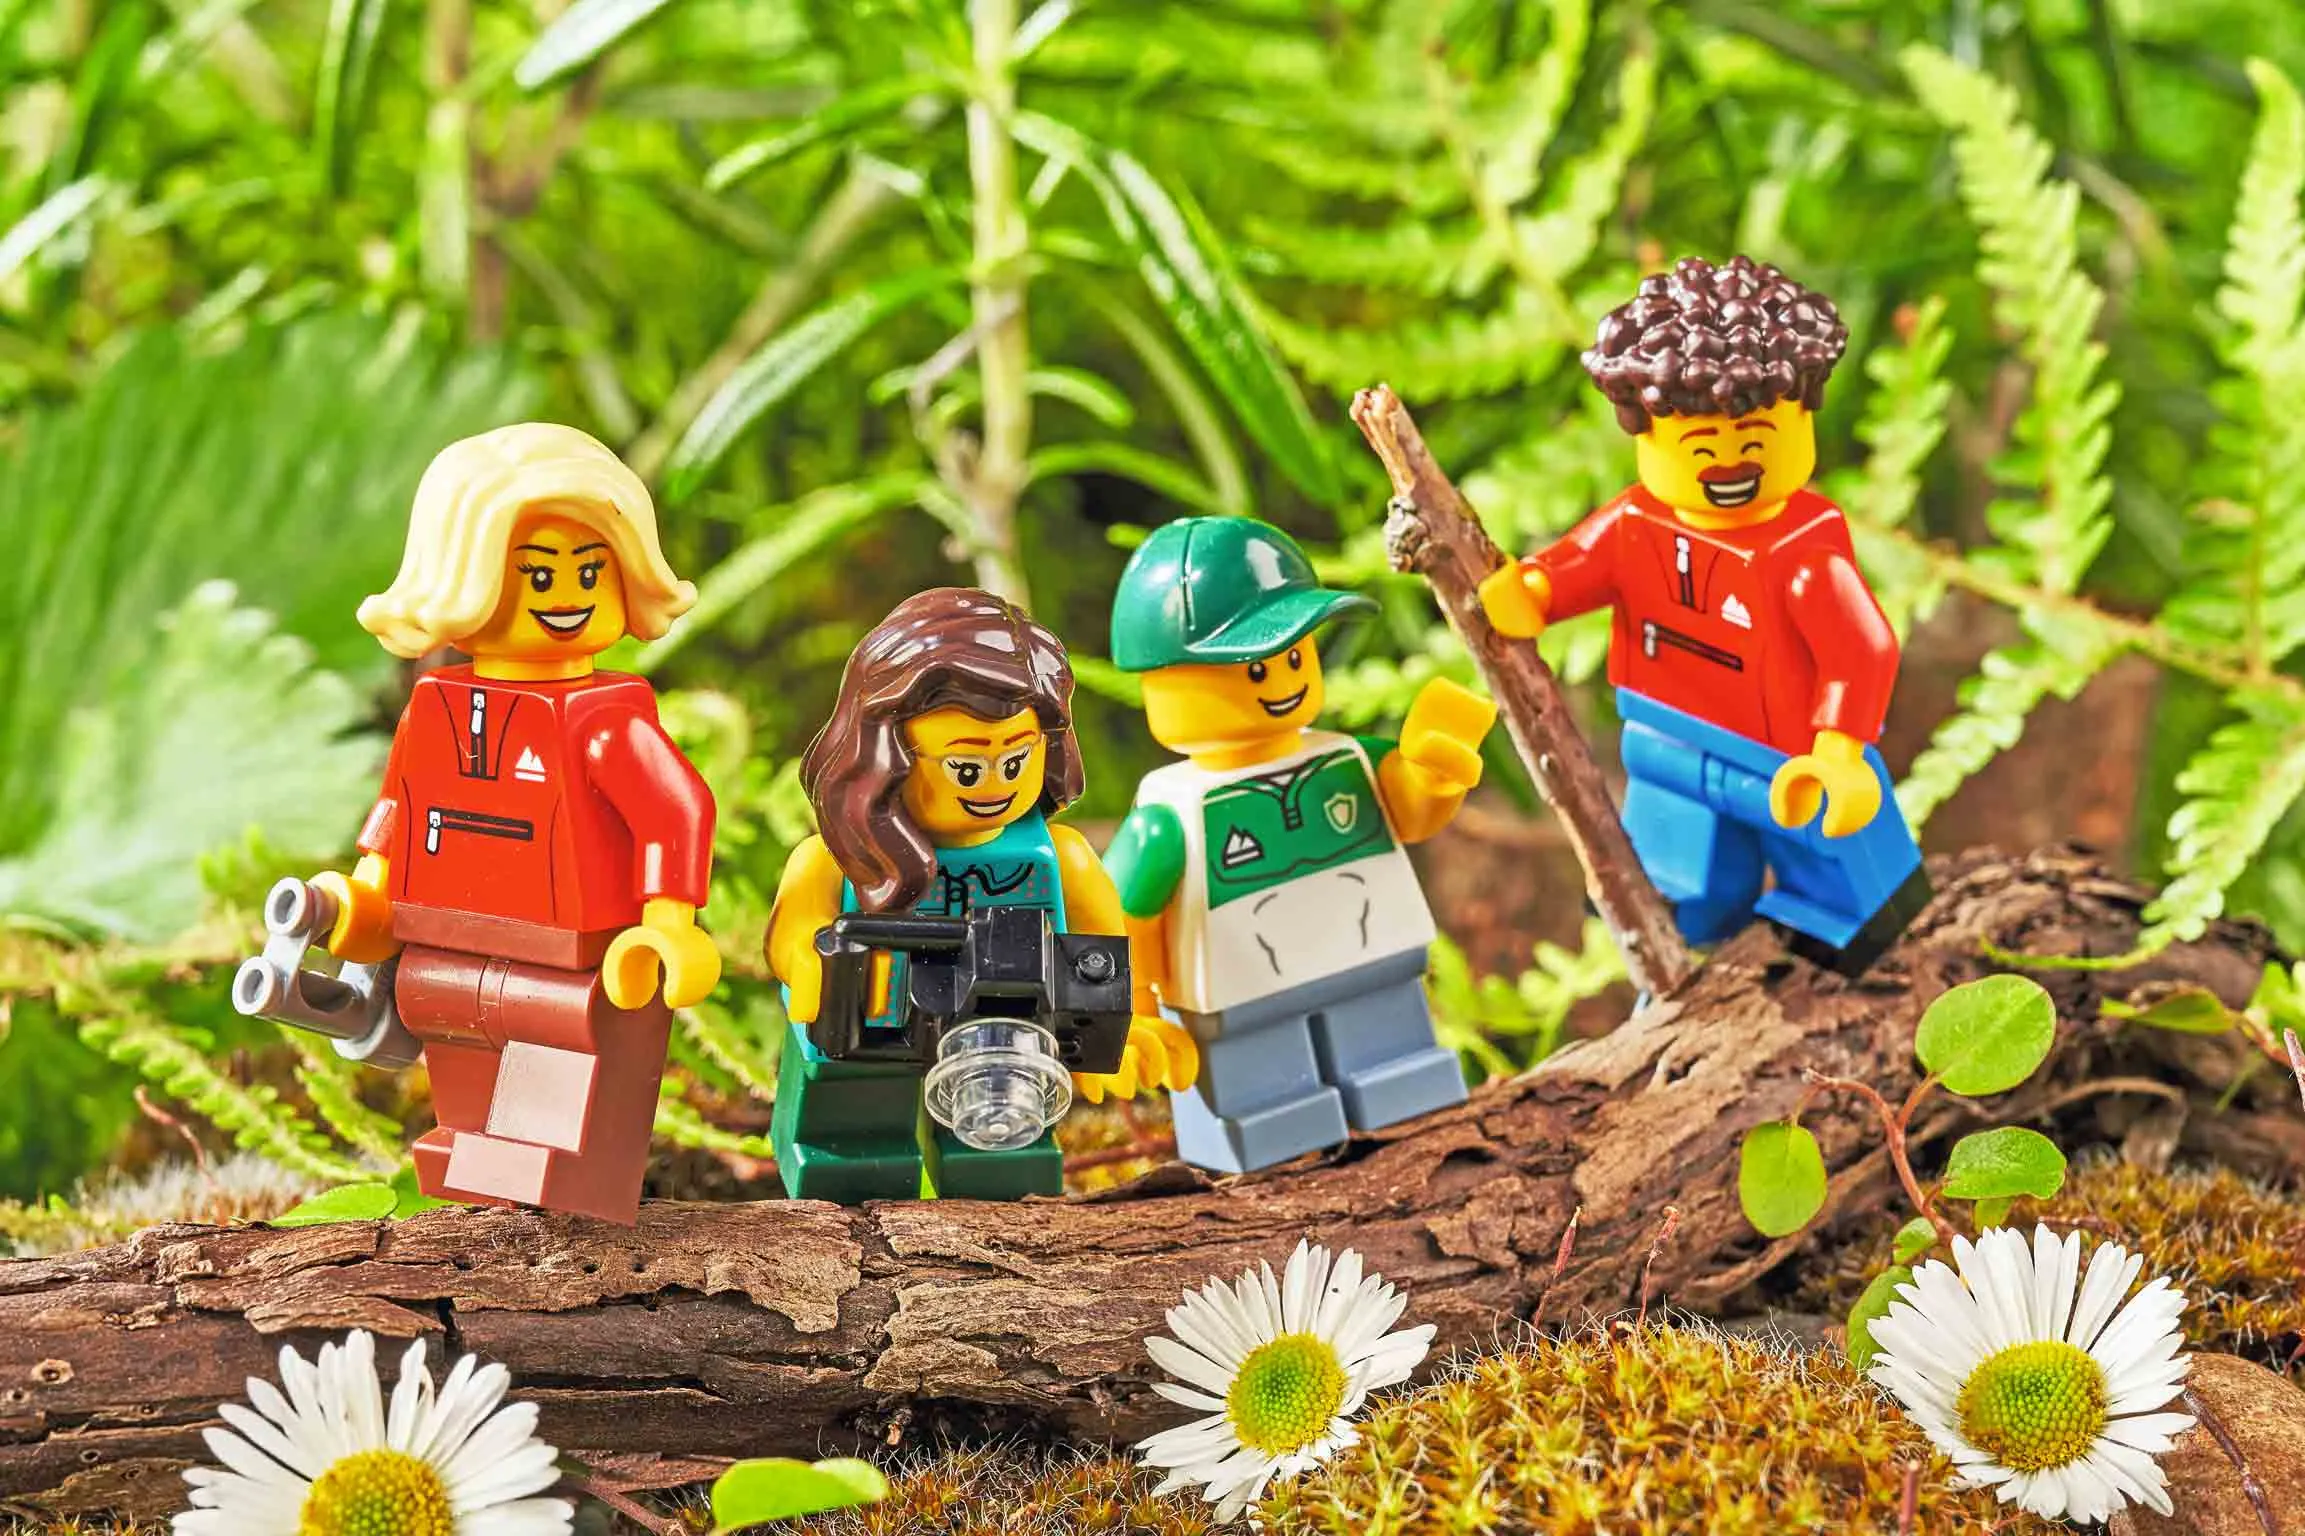 Four LEGO® figures, dressed in outdoor adventure gear, placed on a log and surrounded by ferns and daisies.